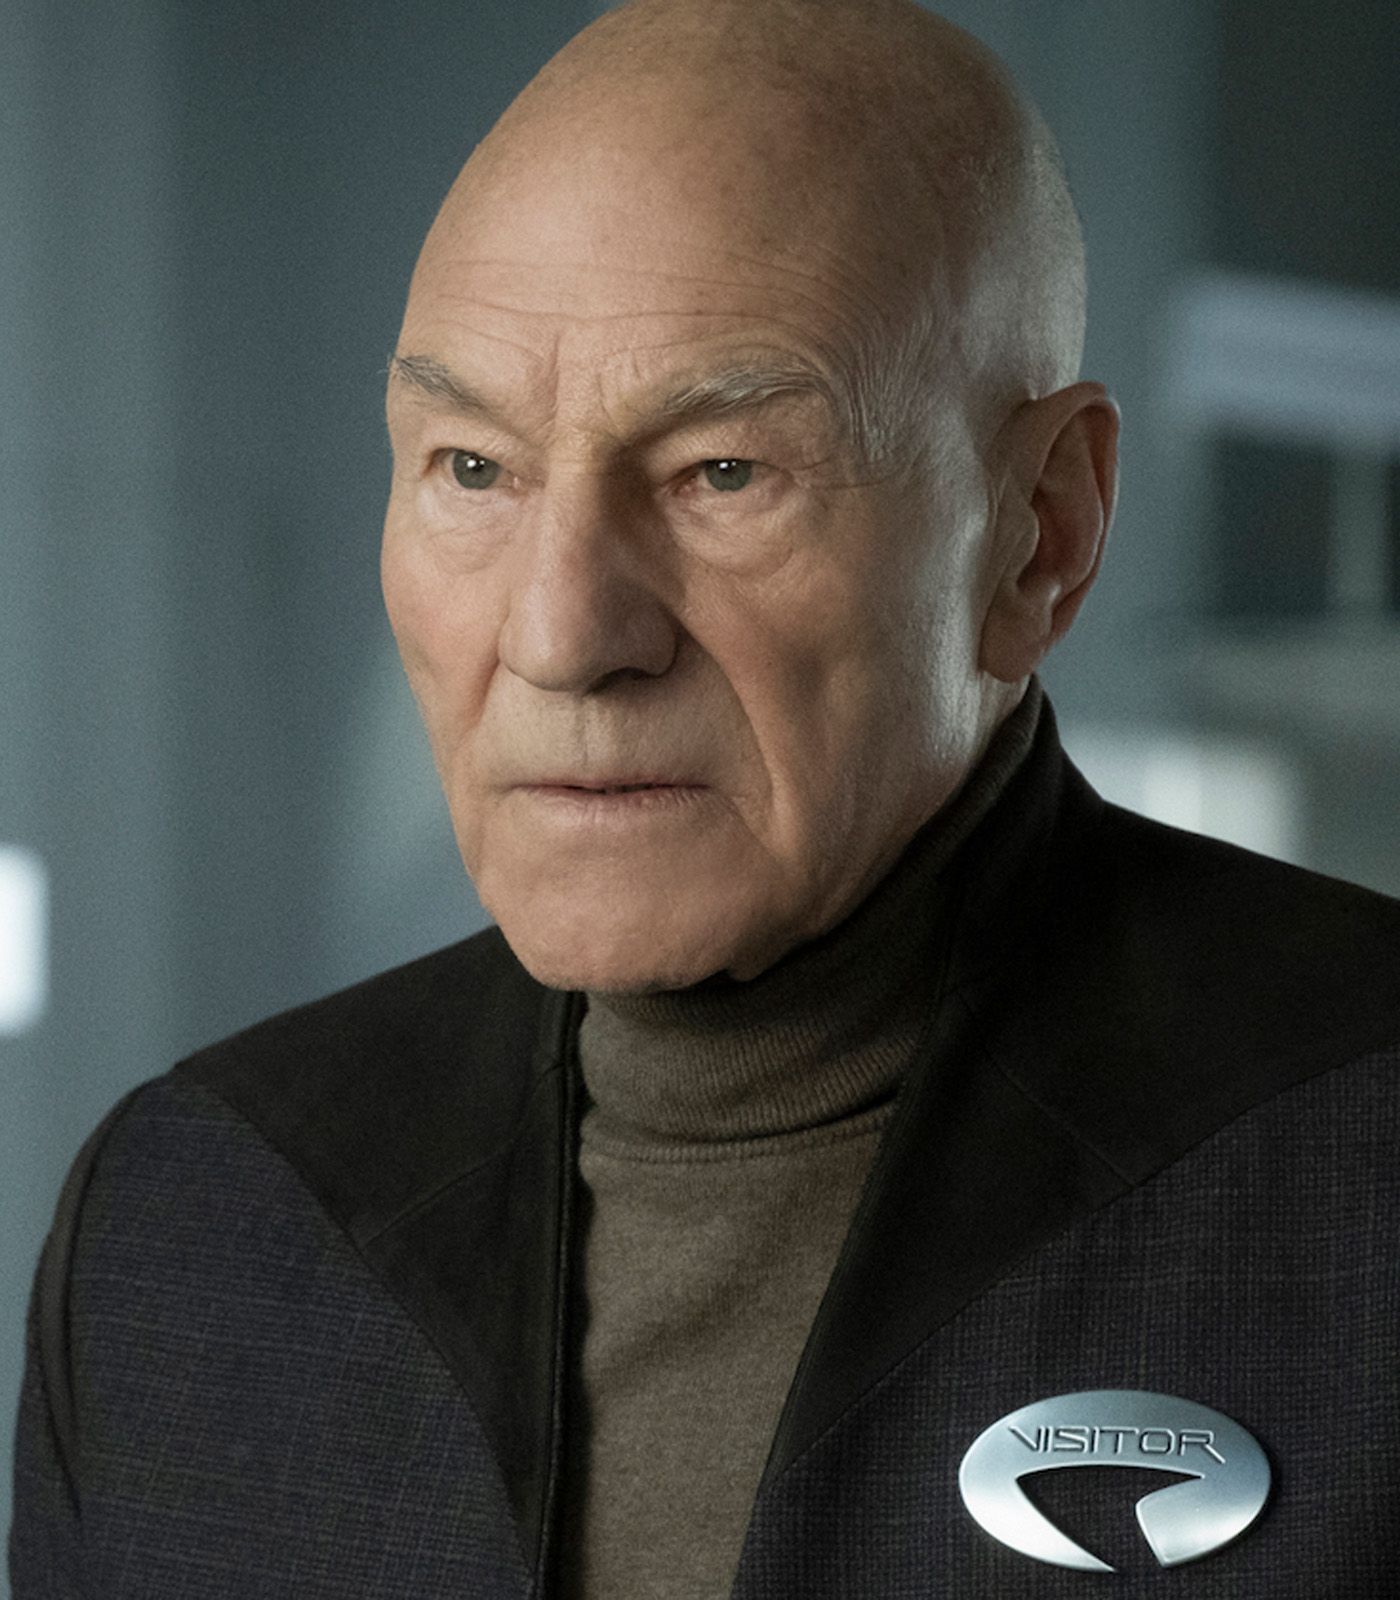 Picard visitor vertical